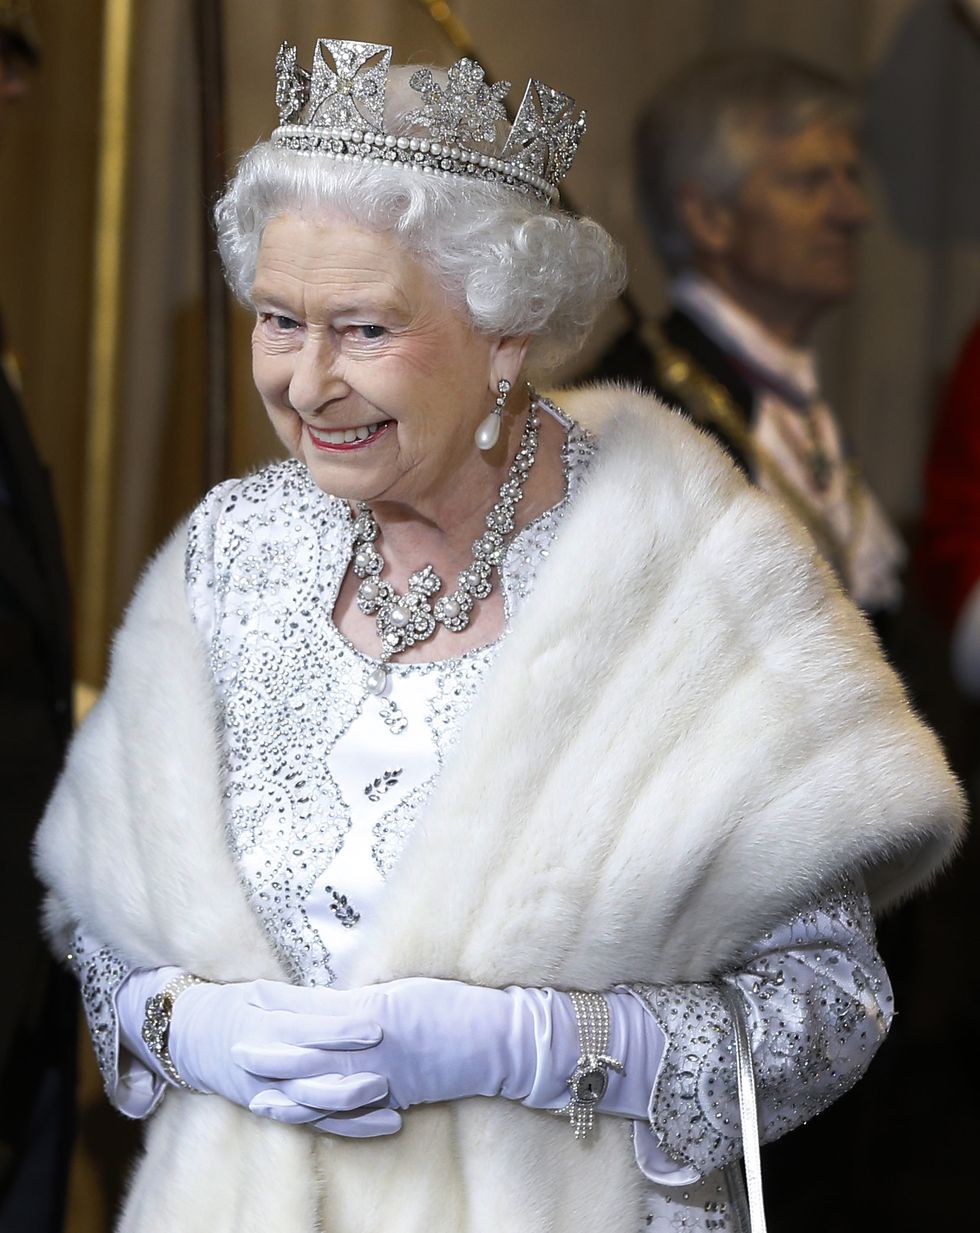 LONDON, ENGLAND - MAY 08:  Queen Elizabeth II smiles as she leaves the State Opening of Parliament at the House of Lords on May 8, 2013 in London, England. Queen Elizabeth II unveils the coalition government's legislative programme in a speech delivered to Members of Parliament and Peers in The House of Lords. Proposed legislation is expected to be introduced on toughening immigration regulations, capping social care costs in England and setting a single state pension rate of 144 GBP per week.  (Photo by Kirsty Wigglesworth - WPA Pool/Getty Images)